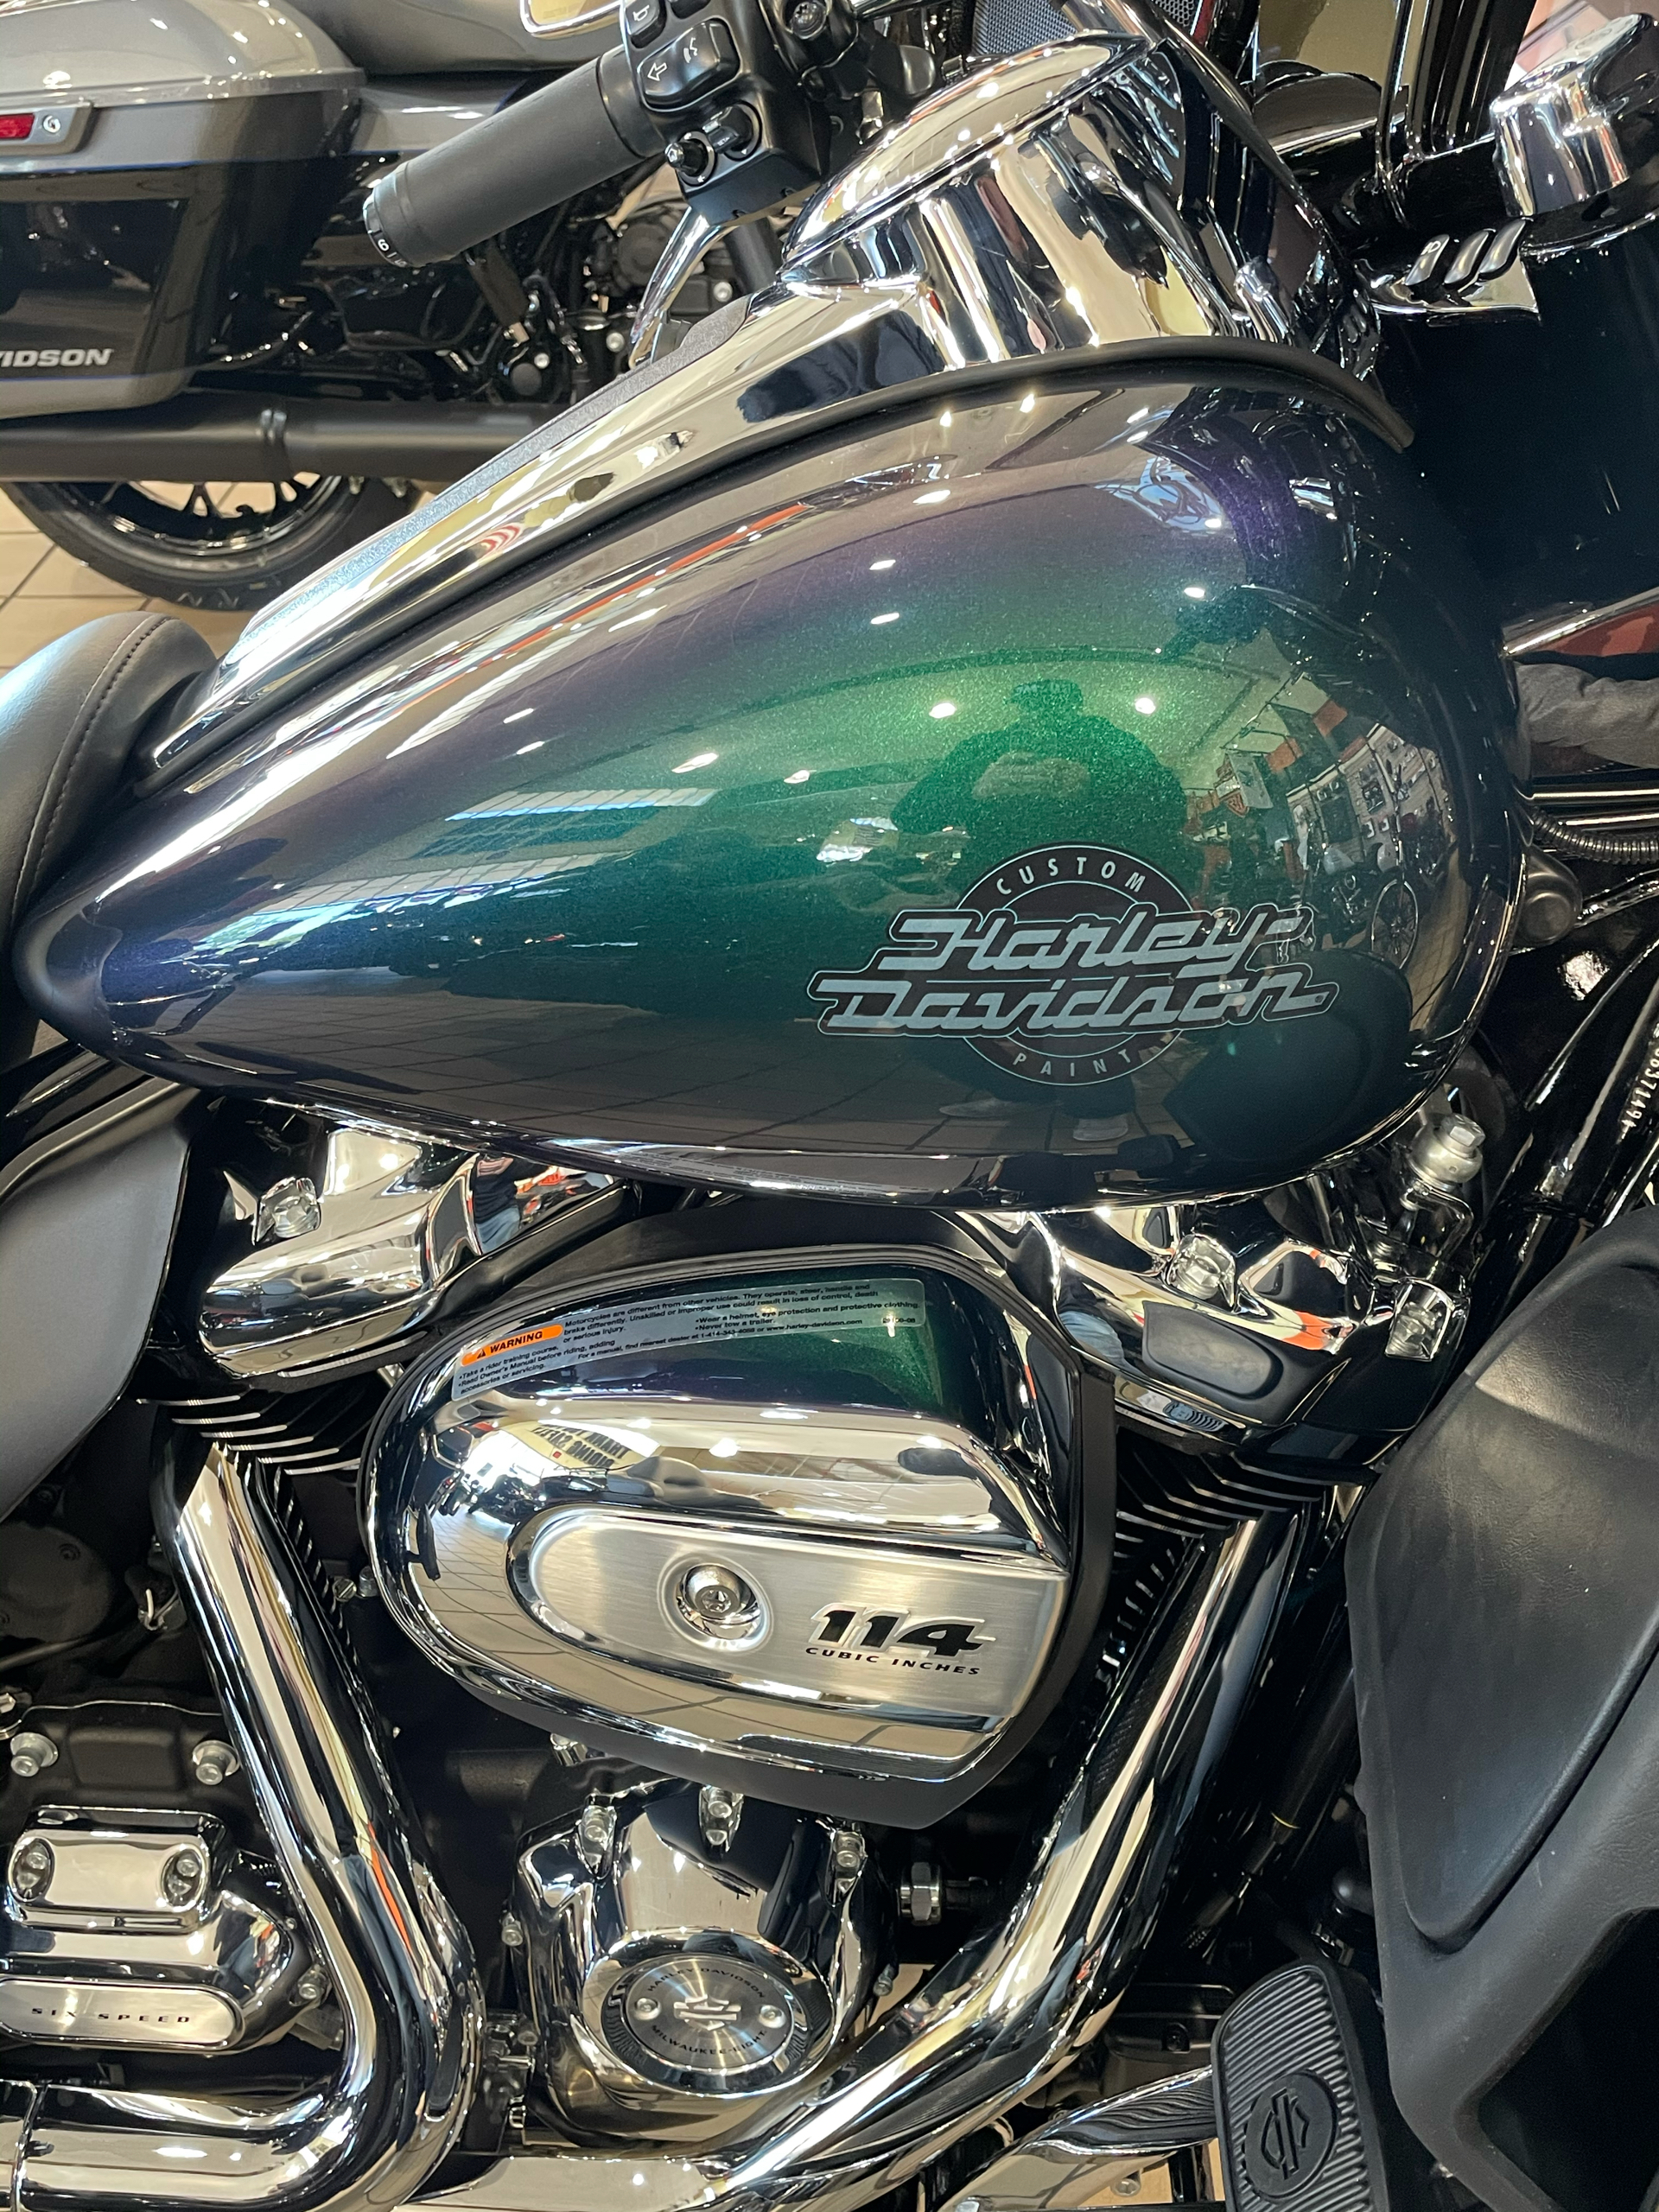 2021 Harley-Davidson Ultra Limited in Dumfries, Virginia - Photo 2